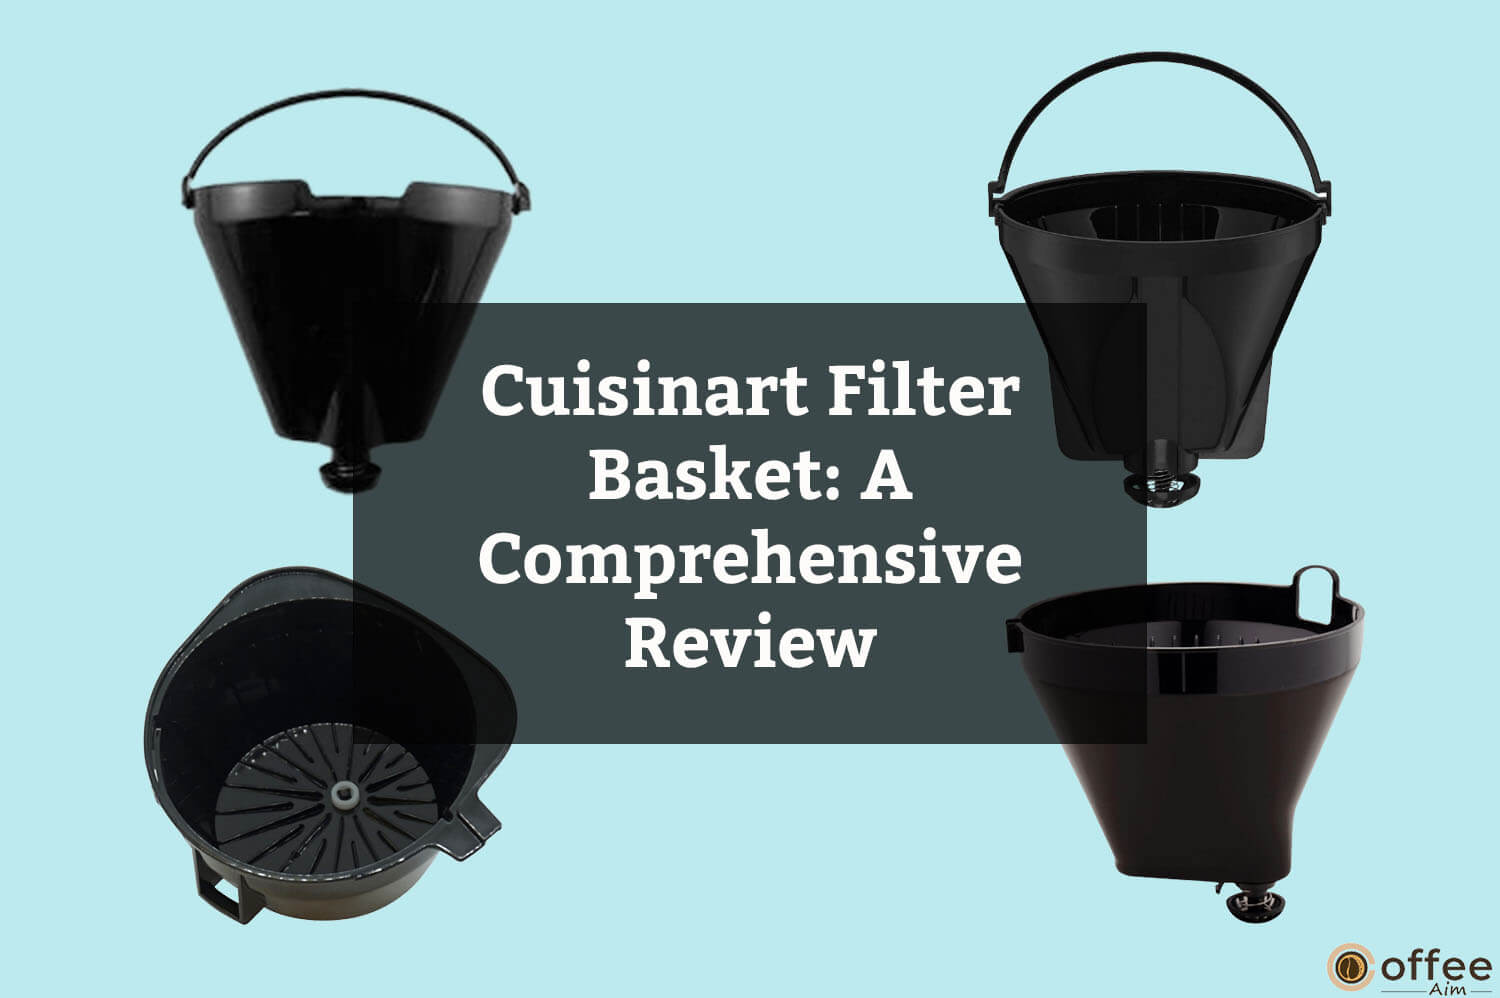 Featured image for the artical "Cuisinart Filter Basket: A Comprehensive Review"